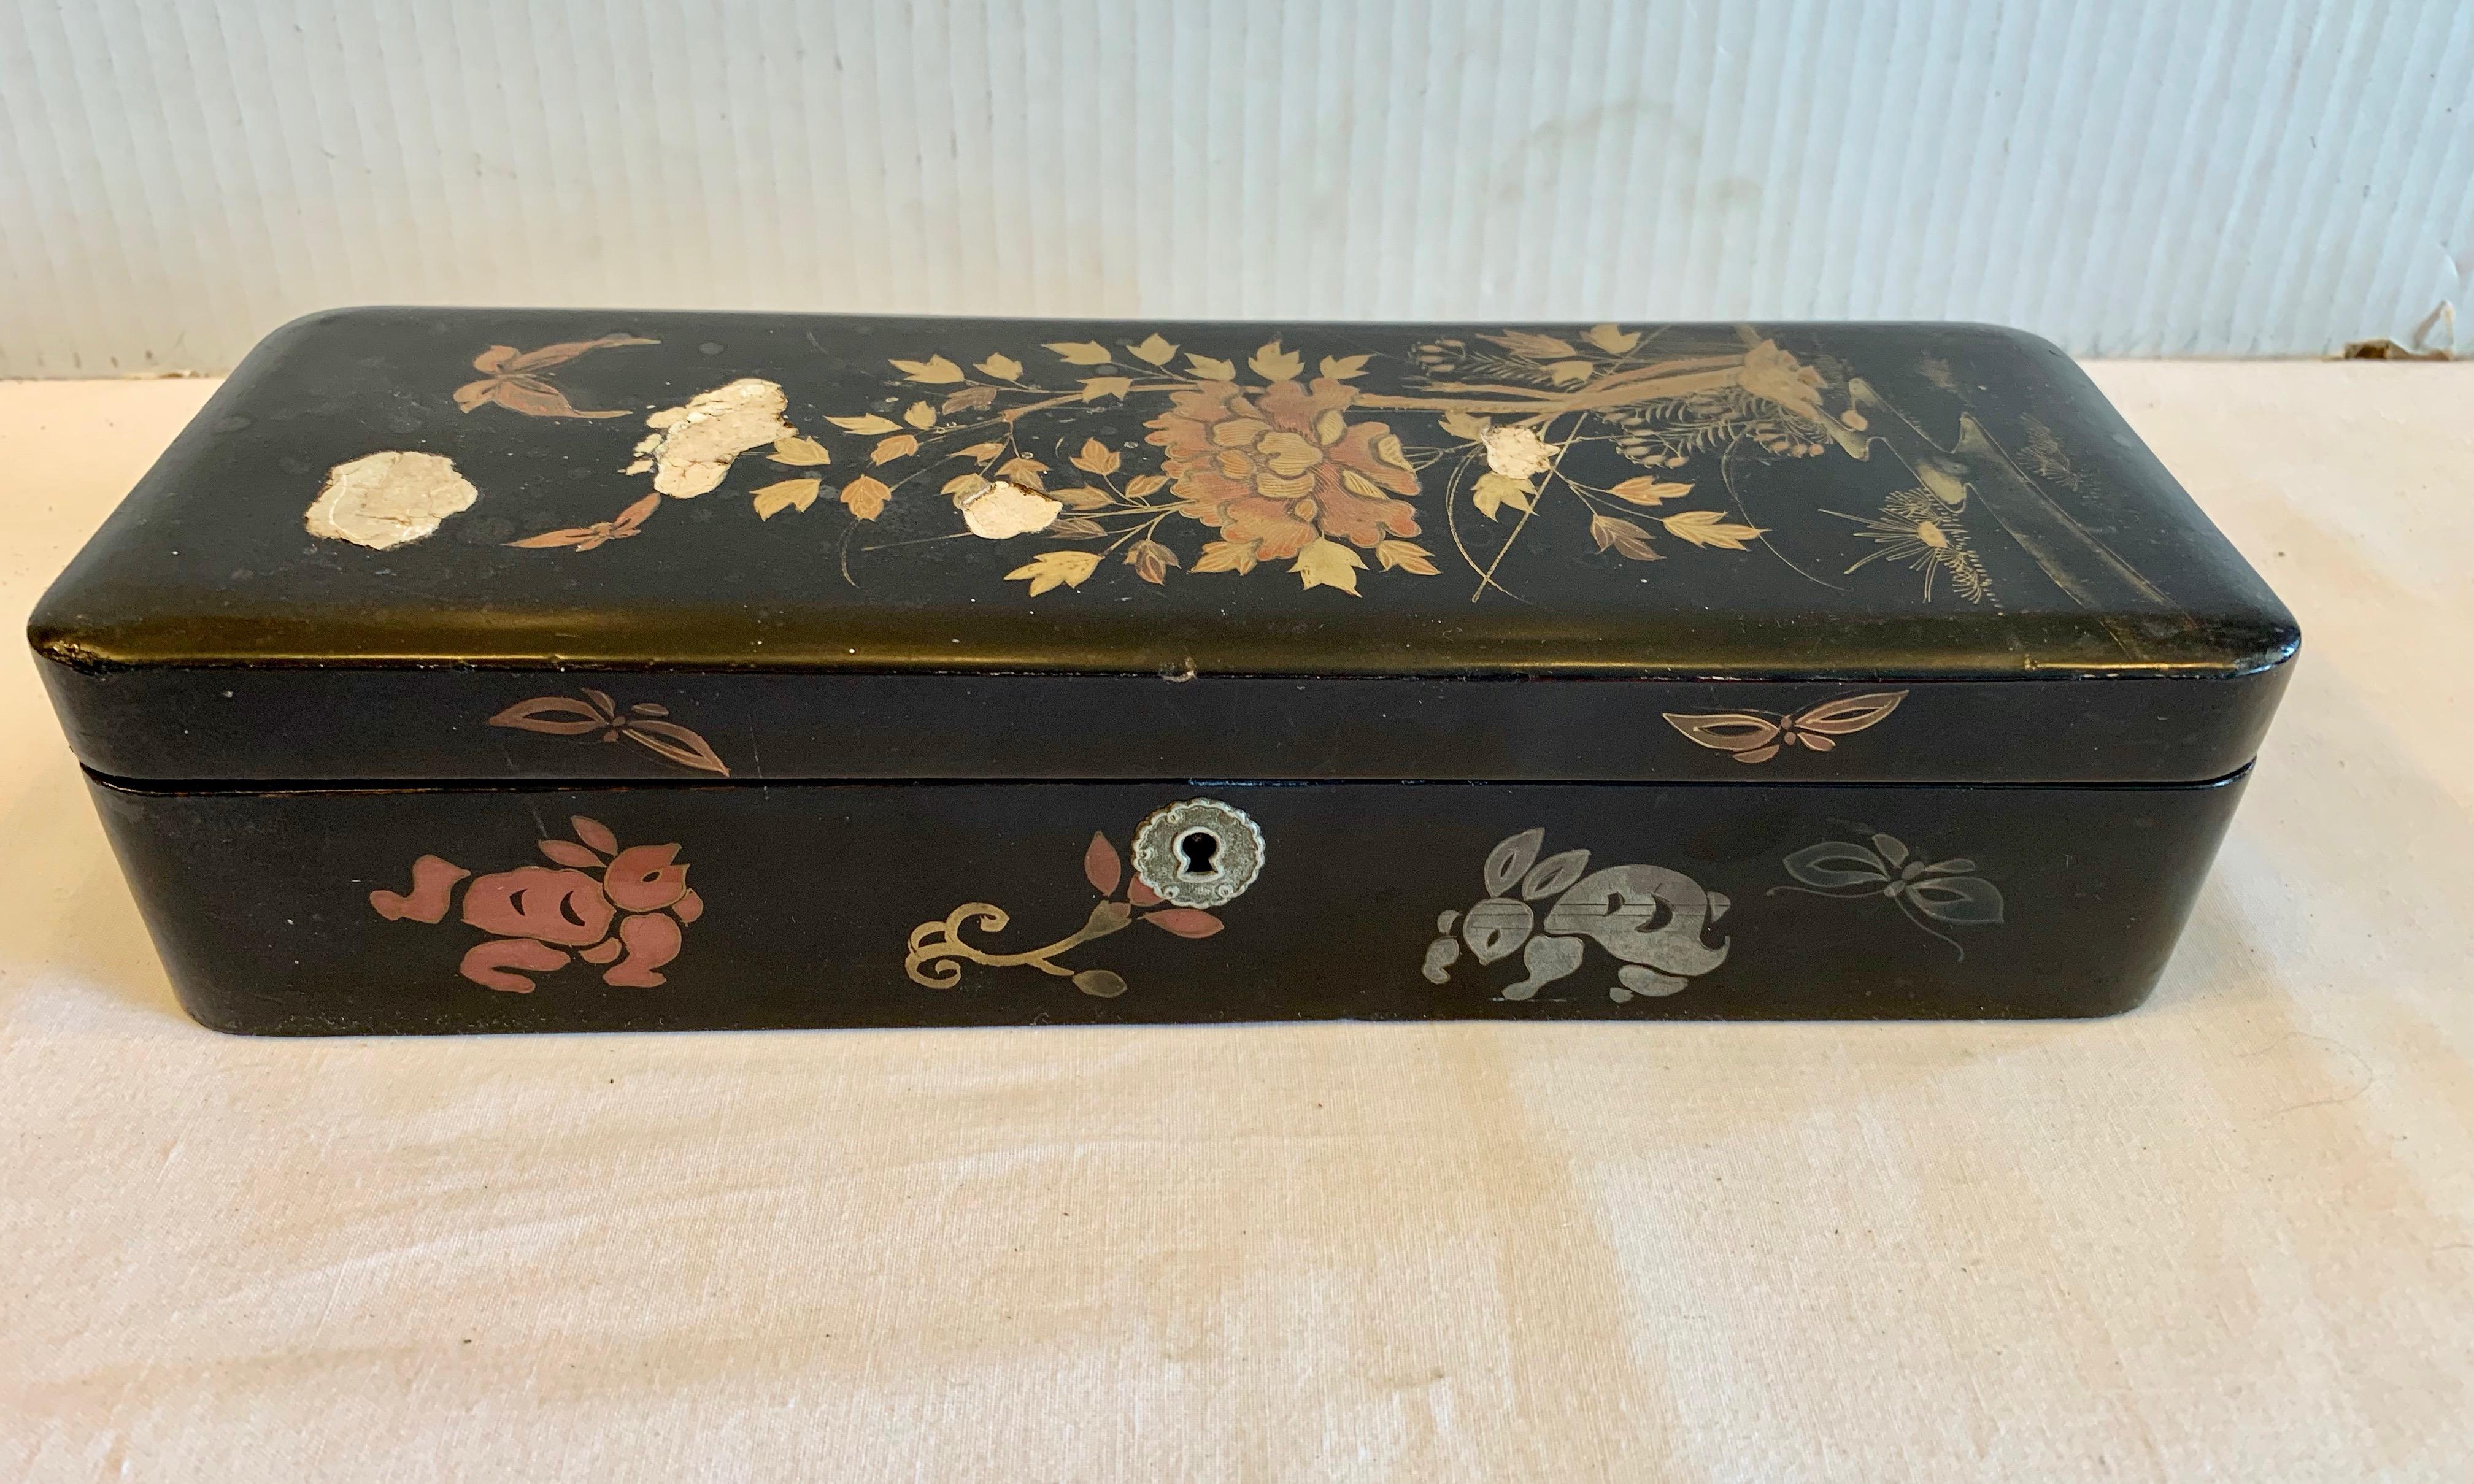 Exquisitely fine pen work with florals and foliage.
The box is appointed with mother -of - pearl inlays.
It decorated on all 4 sides, as well; and appointed with a butterfly hovering
above the florals